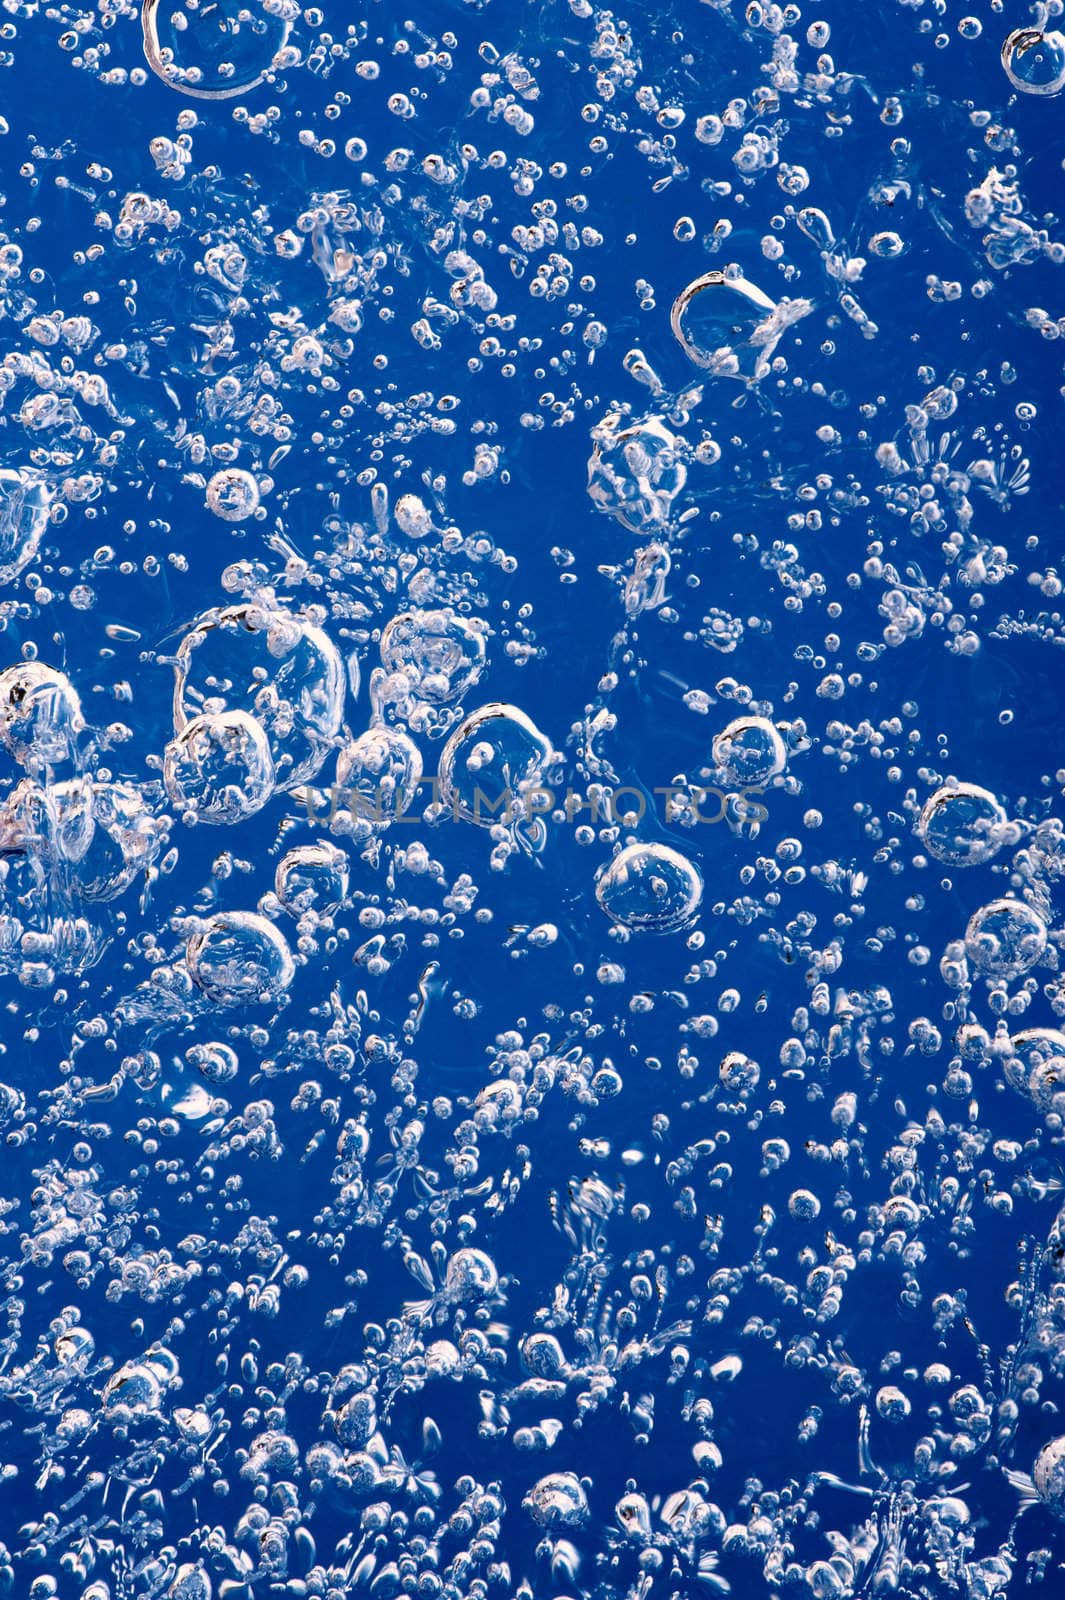 Air bubbles frozen in ice. Close-up